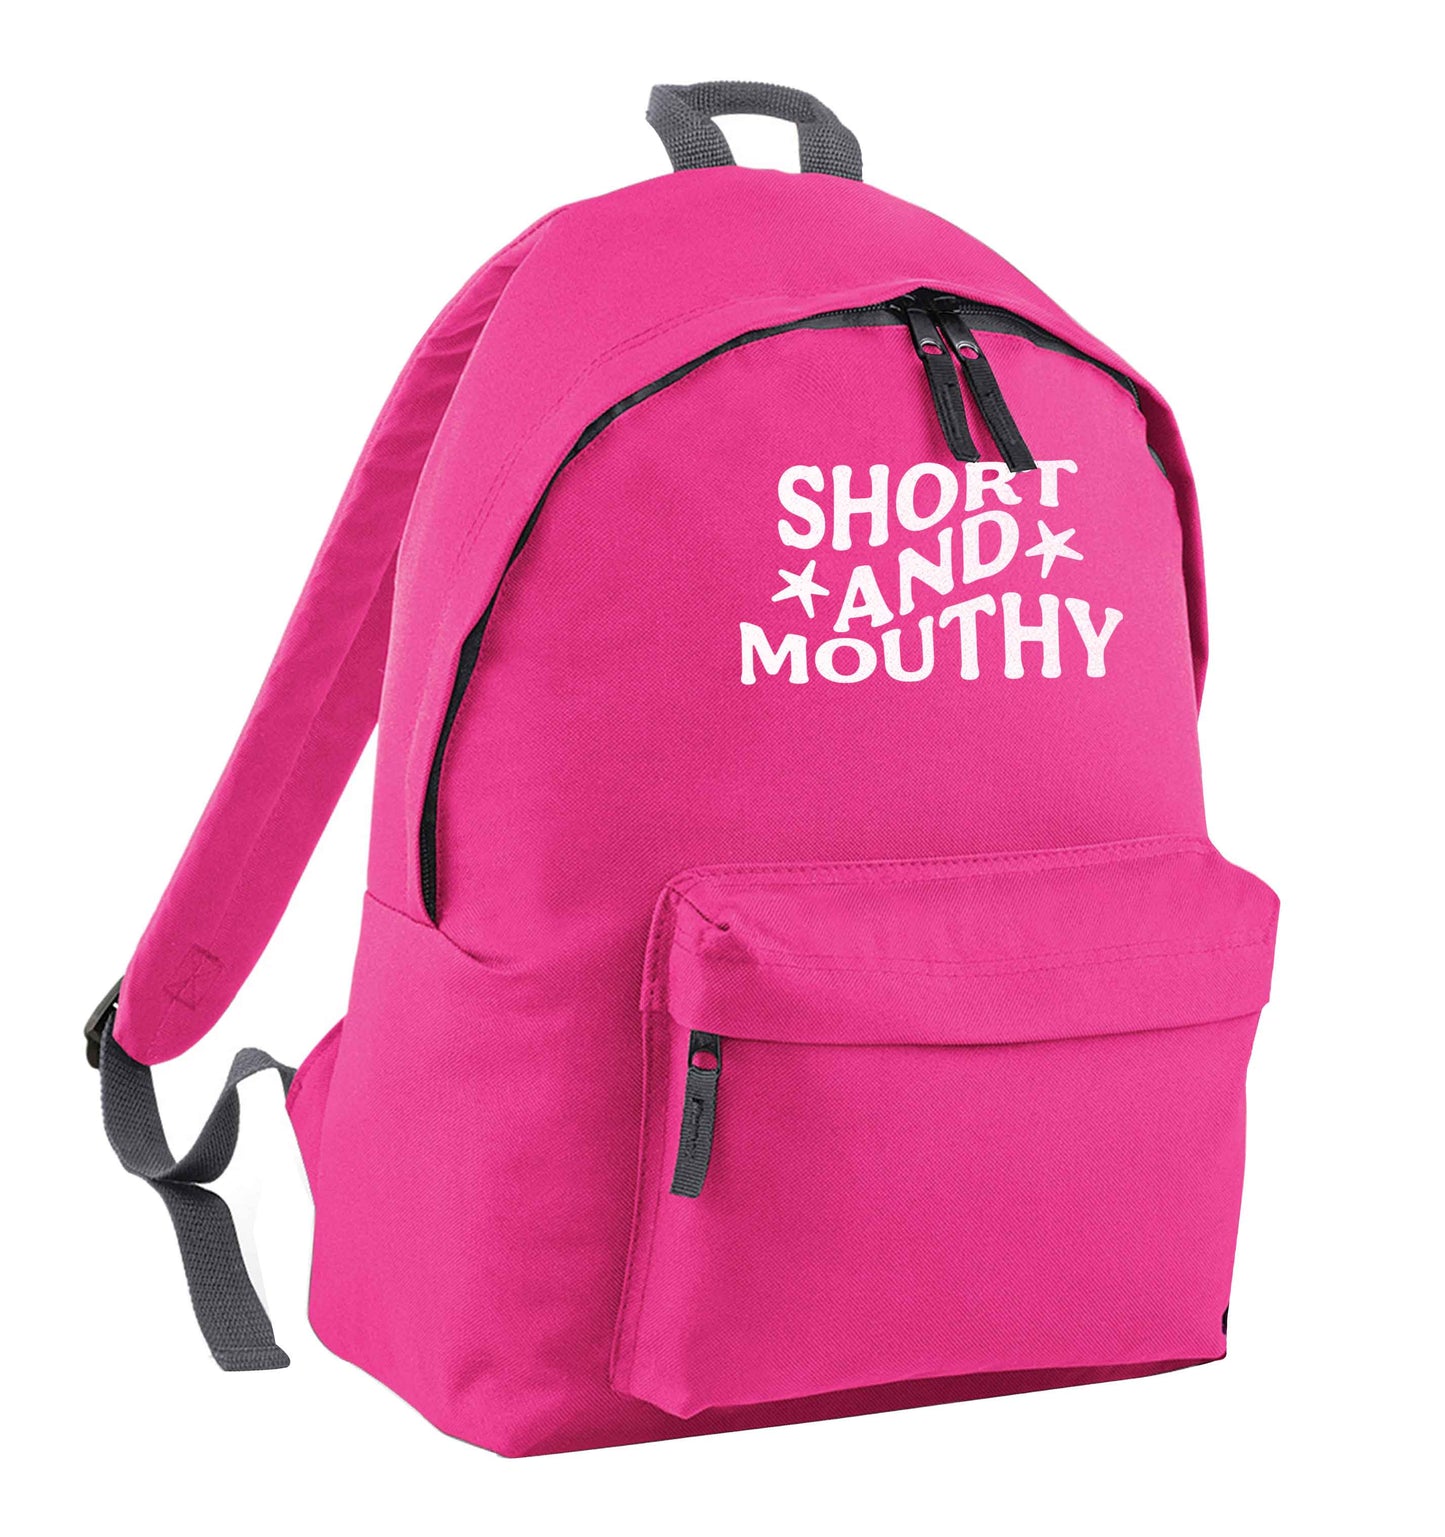 Short and mouthy pink adults backpack